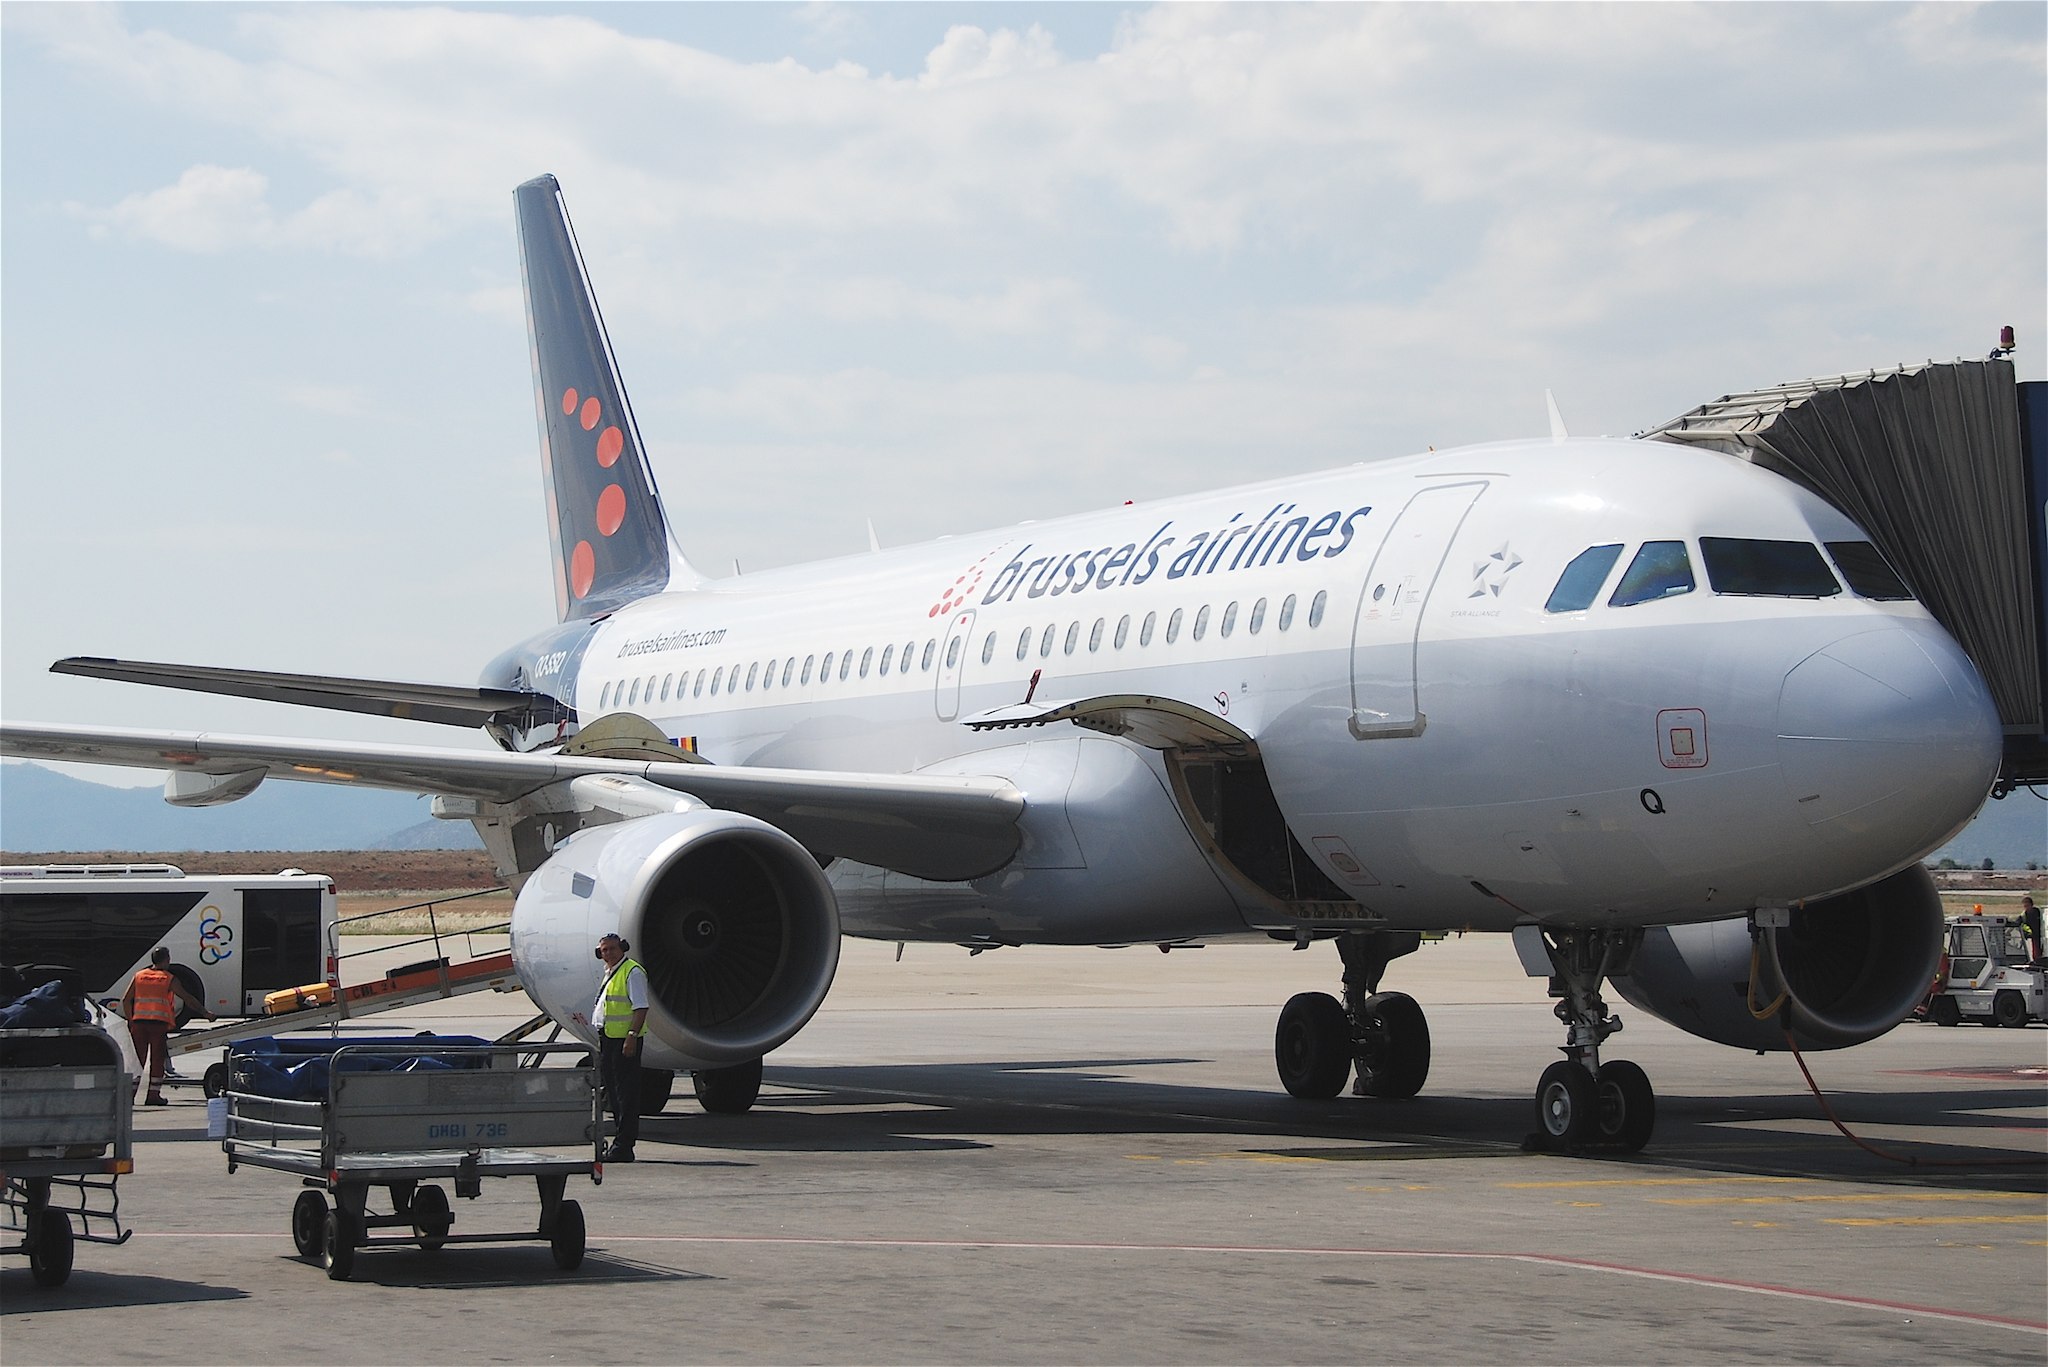 Brussels Airlines Airbus A319-111; OO-SSQ@ATH;12.06.2011/600ay par Aero Icarus sous (CC BY-SA 2.0) https://www.flickr.com/photos/aero_icarus/5833000250/ https://creativecommons.org/licenses/by-sa/2.0/